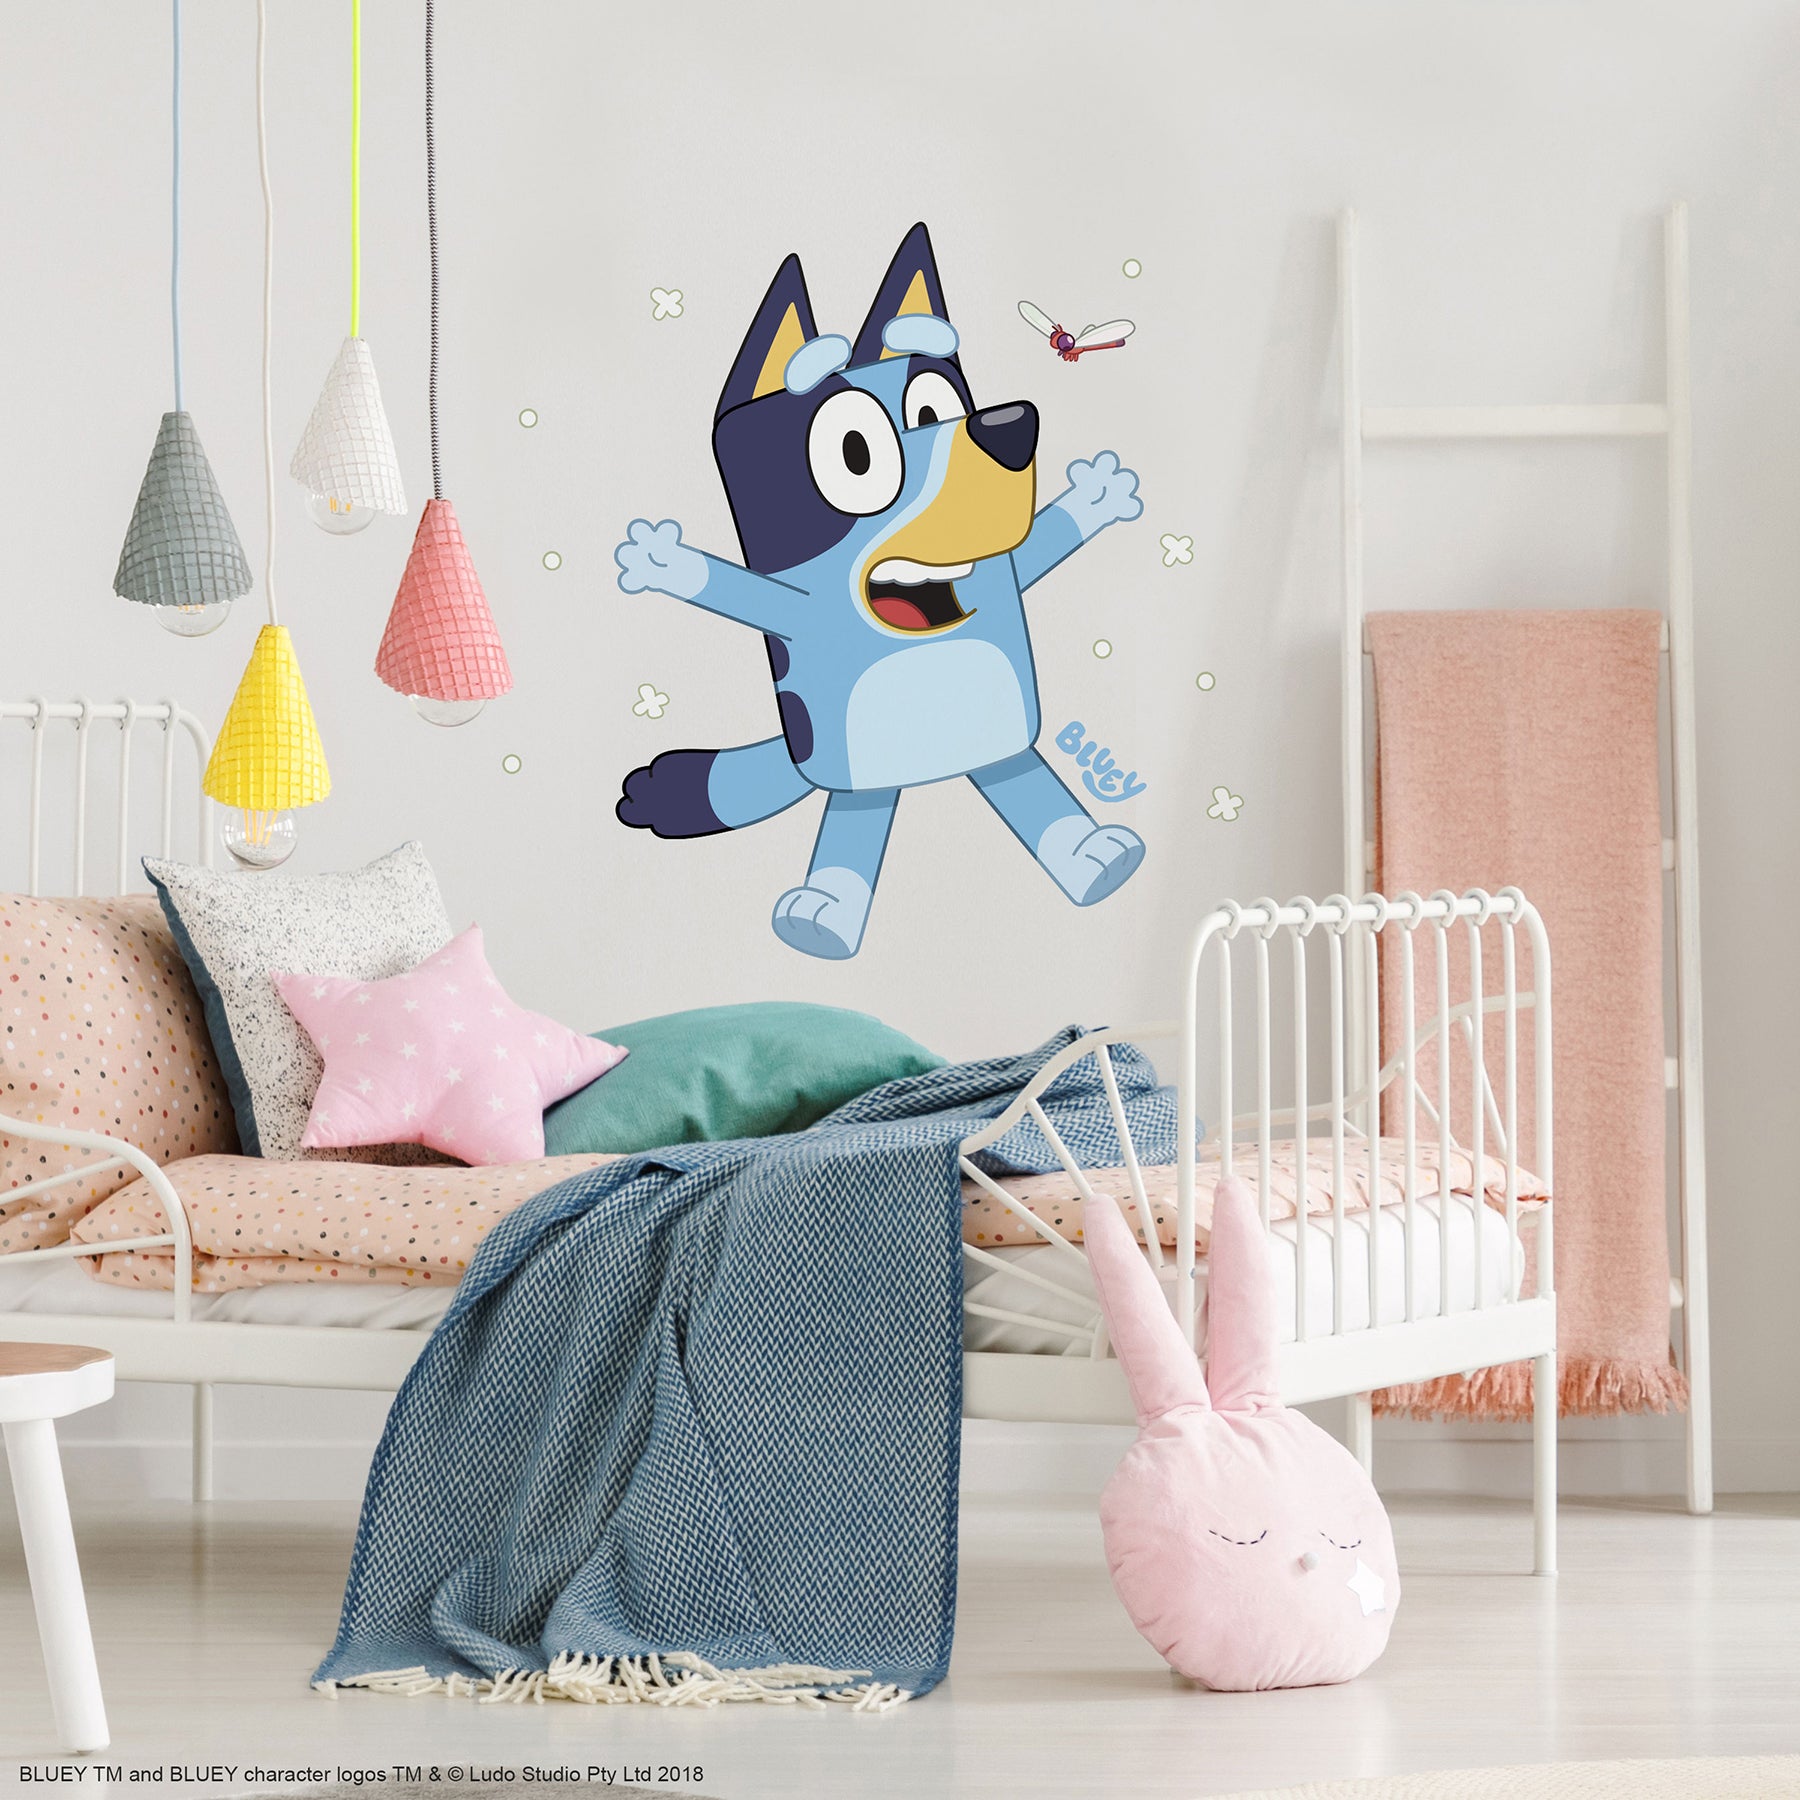 Bluey Character Peel and Stick Wall Decals